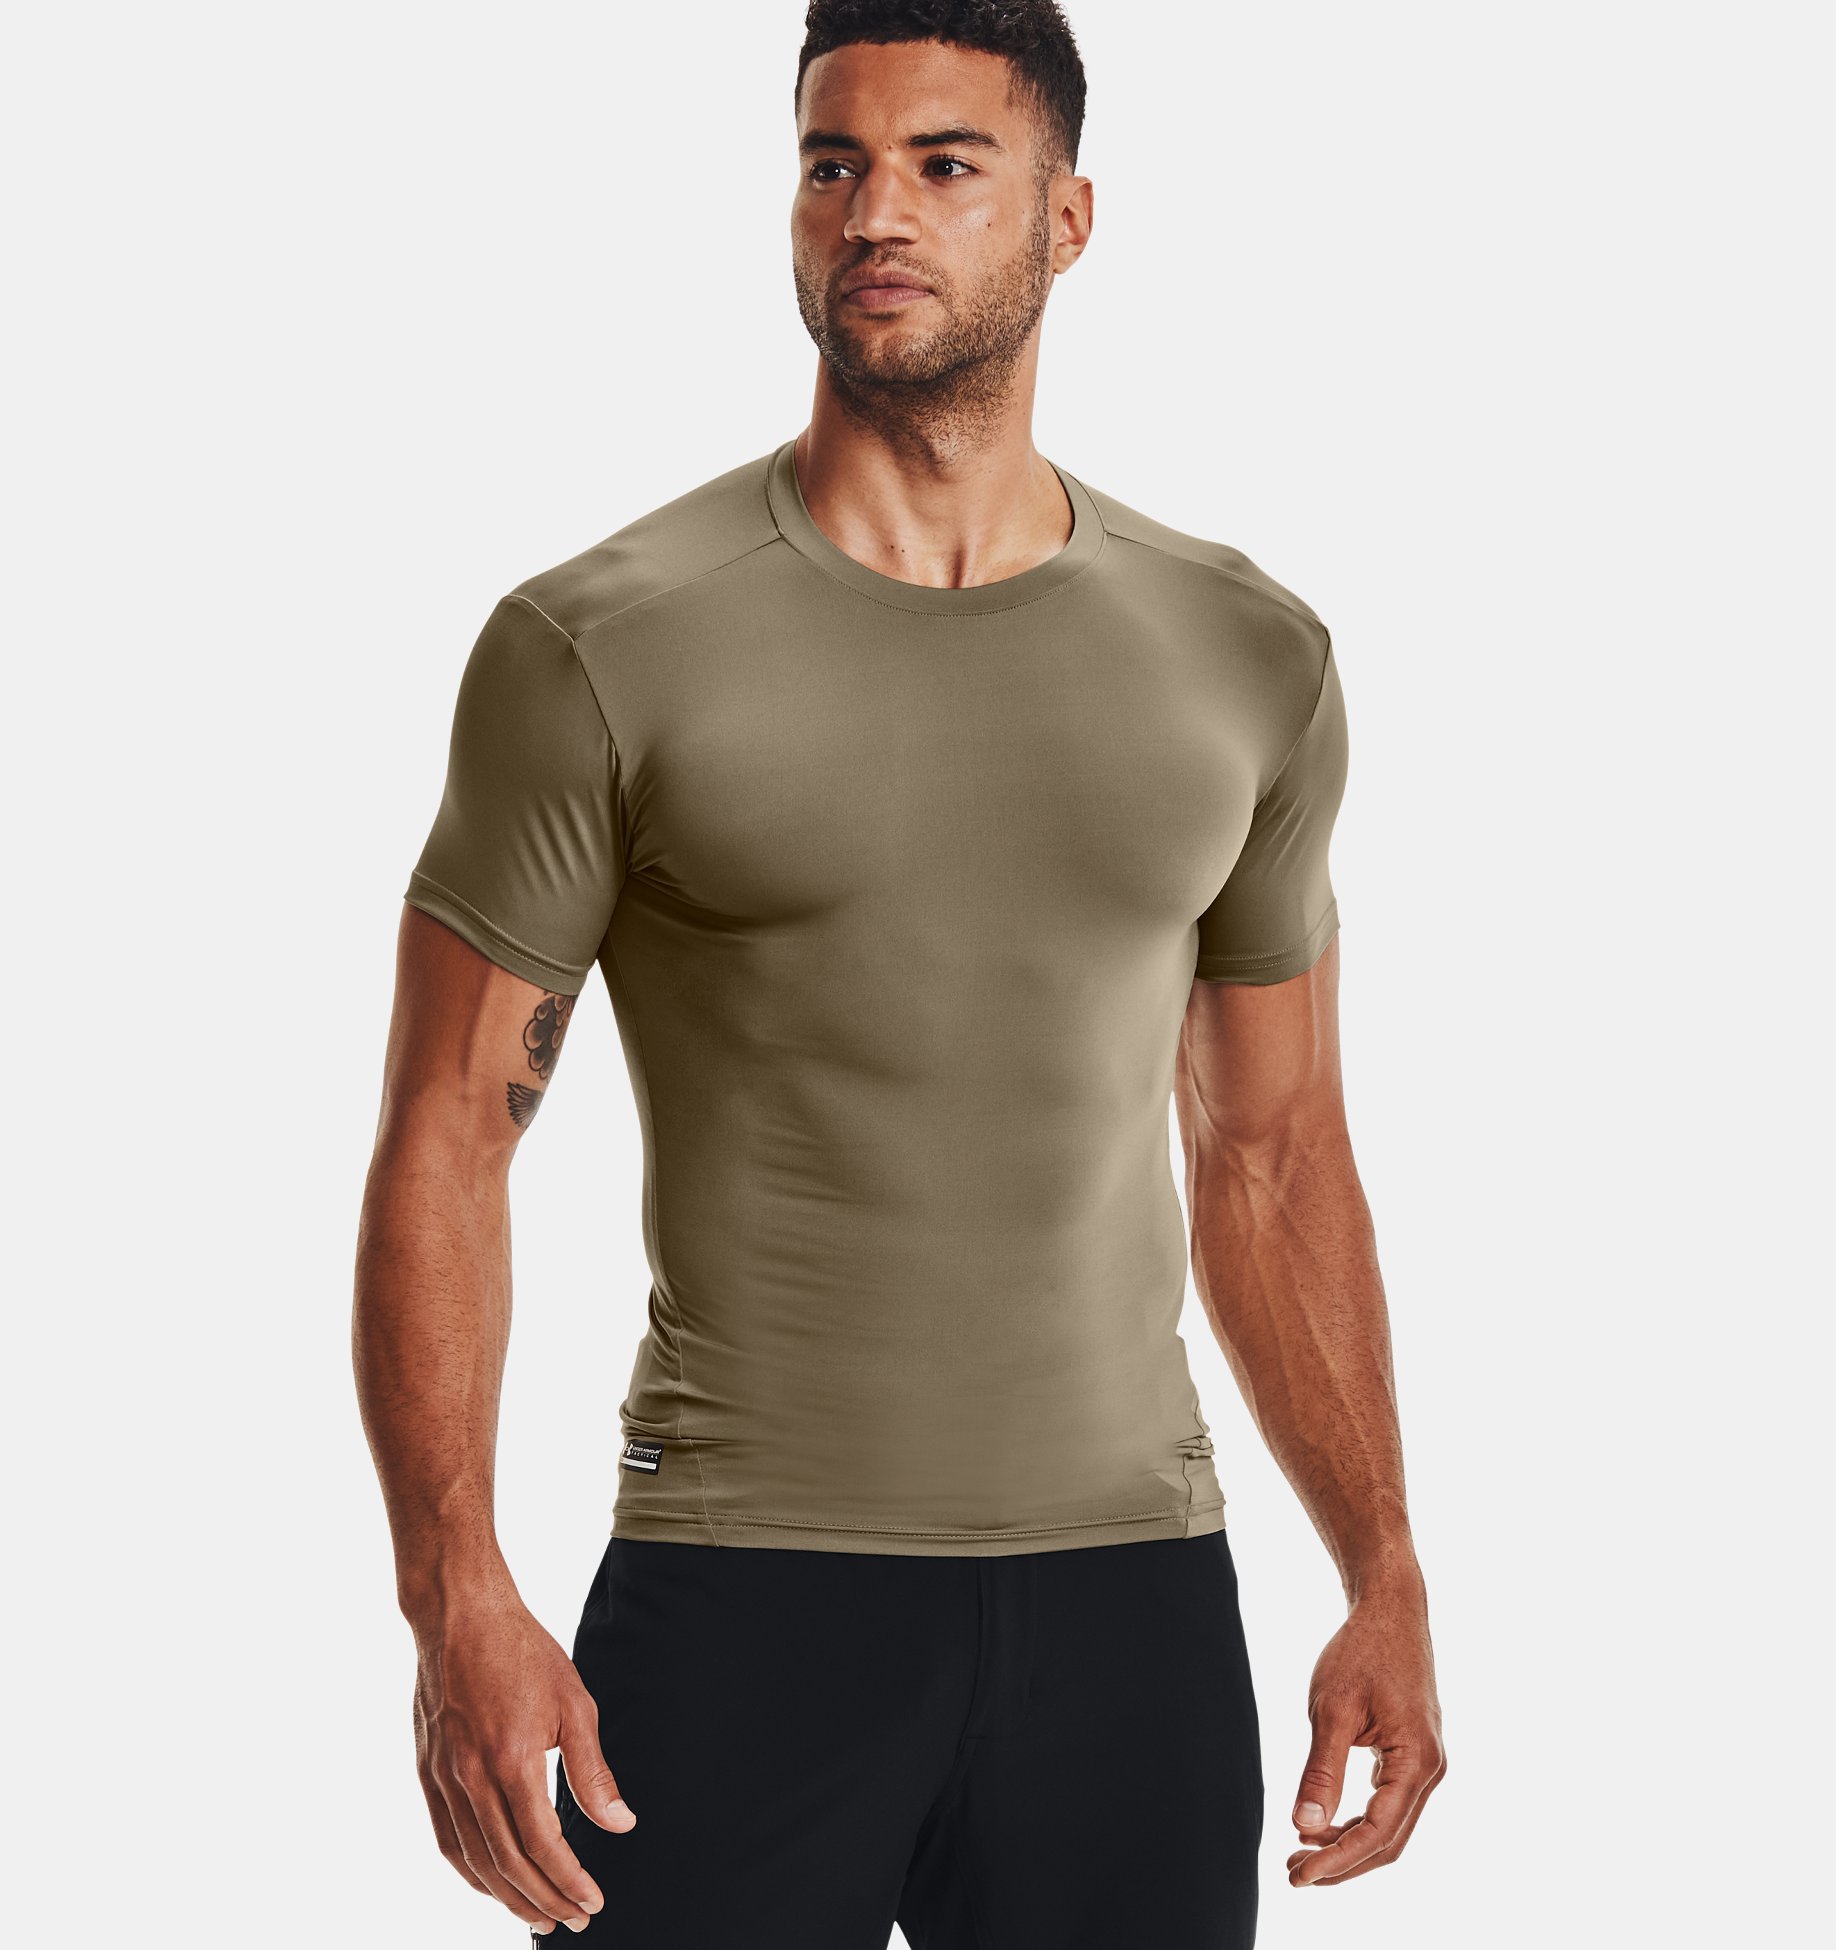 Mens Sports Under Compression Armour Baselayer Short Sleeve T-Shirt Athletic Top 